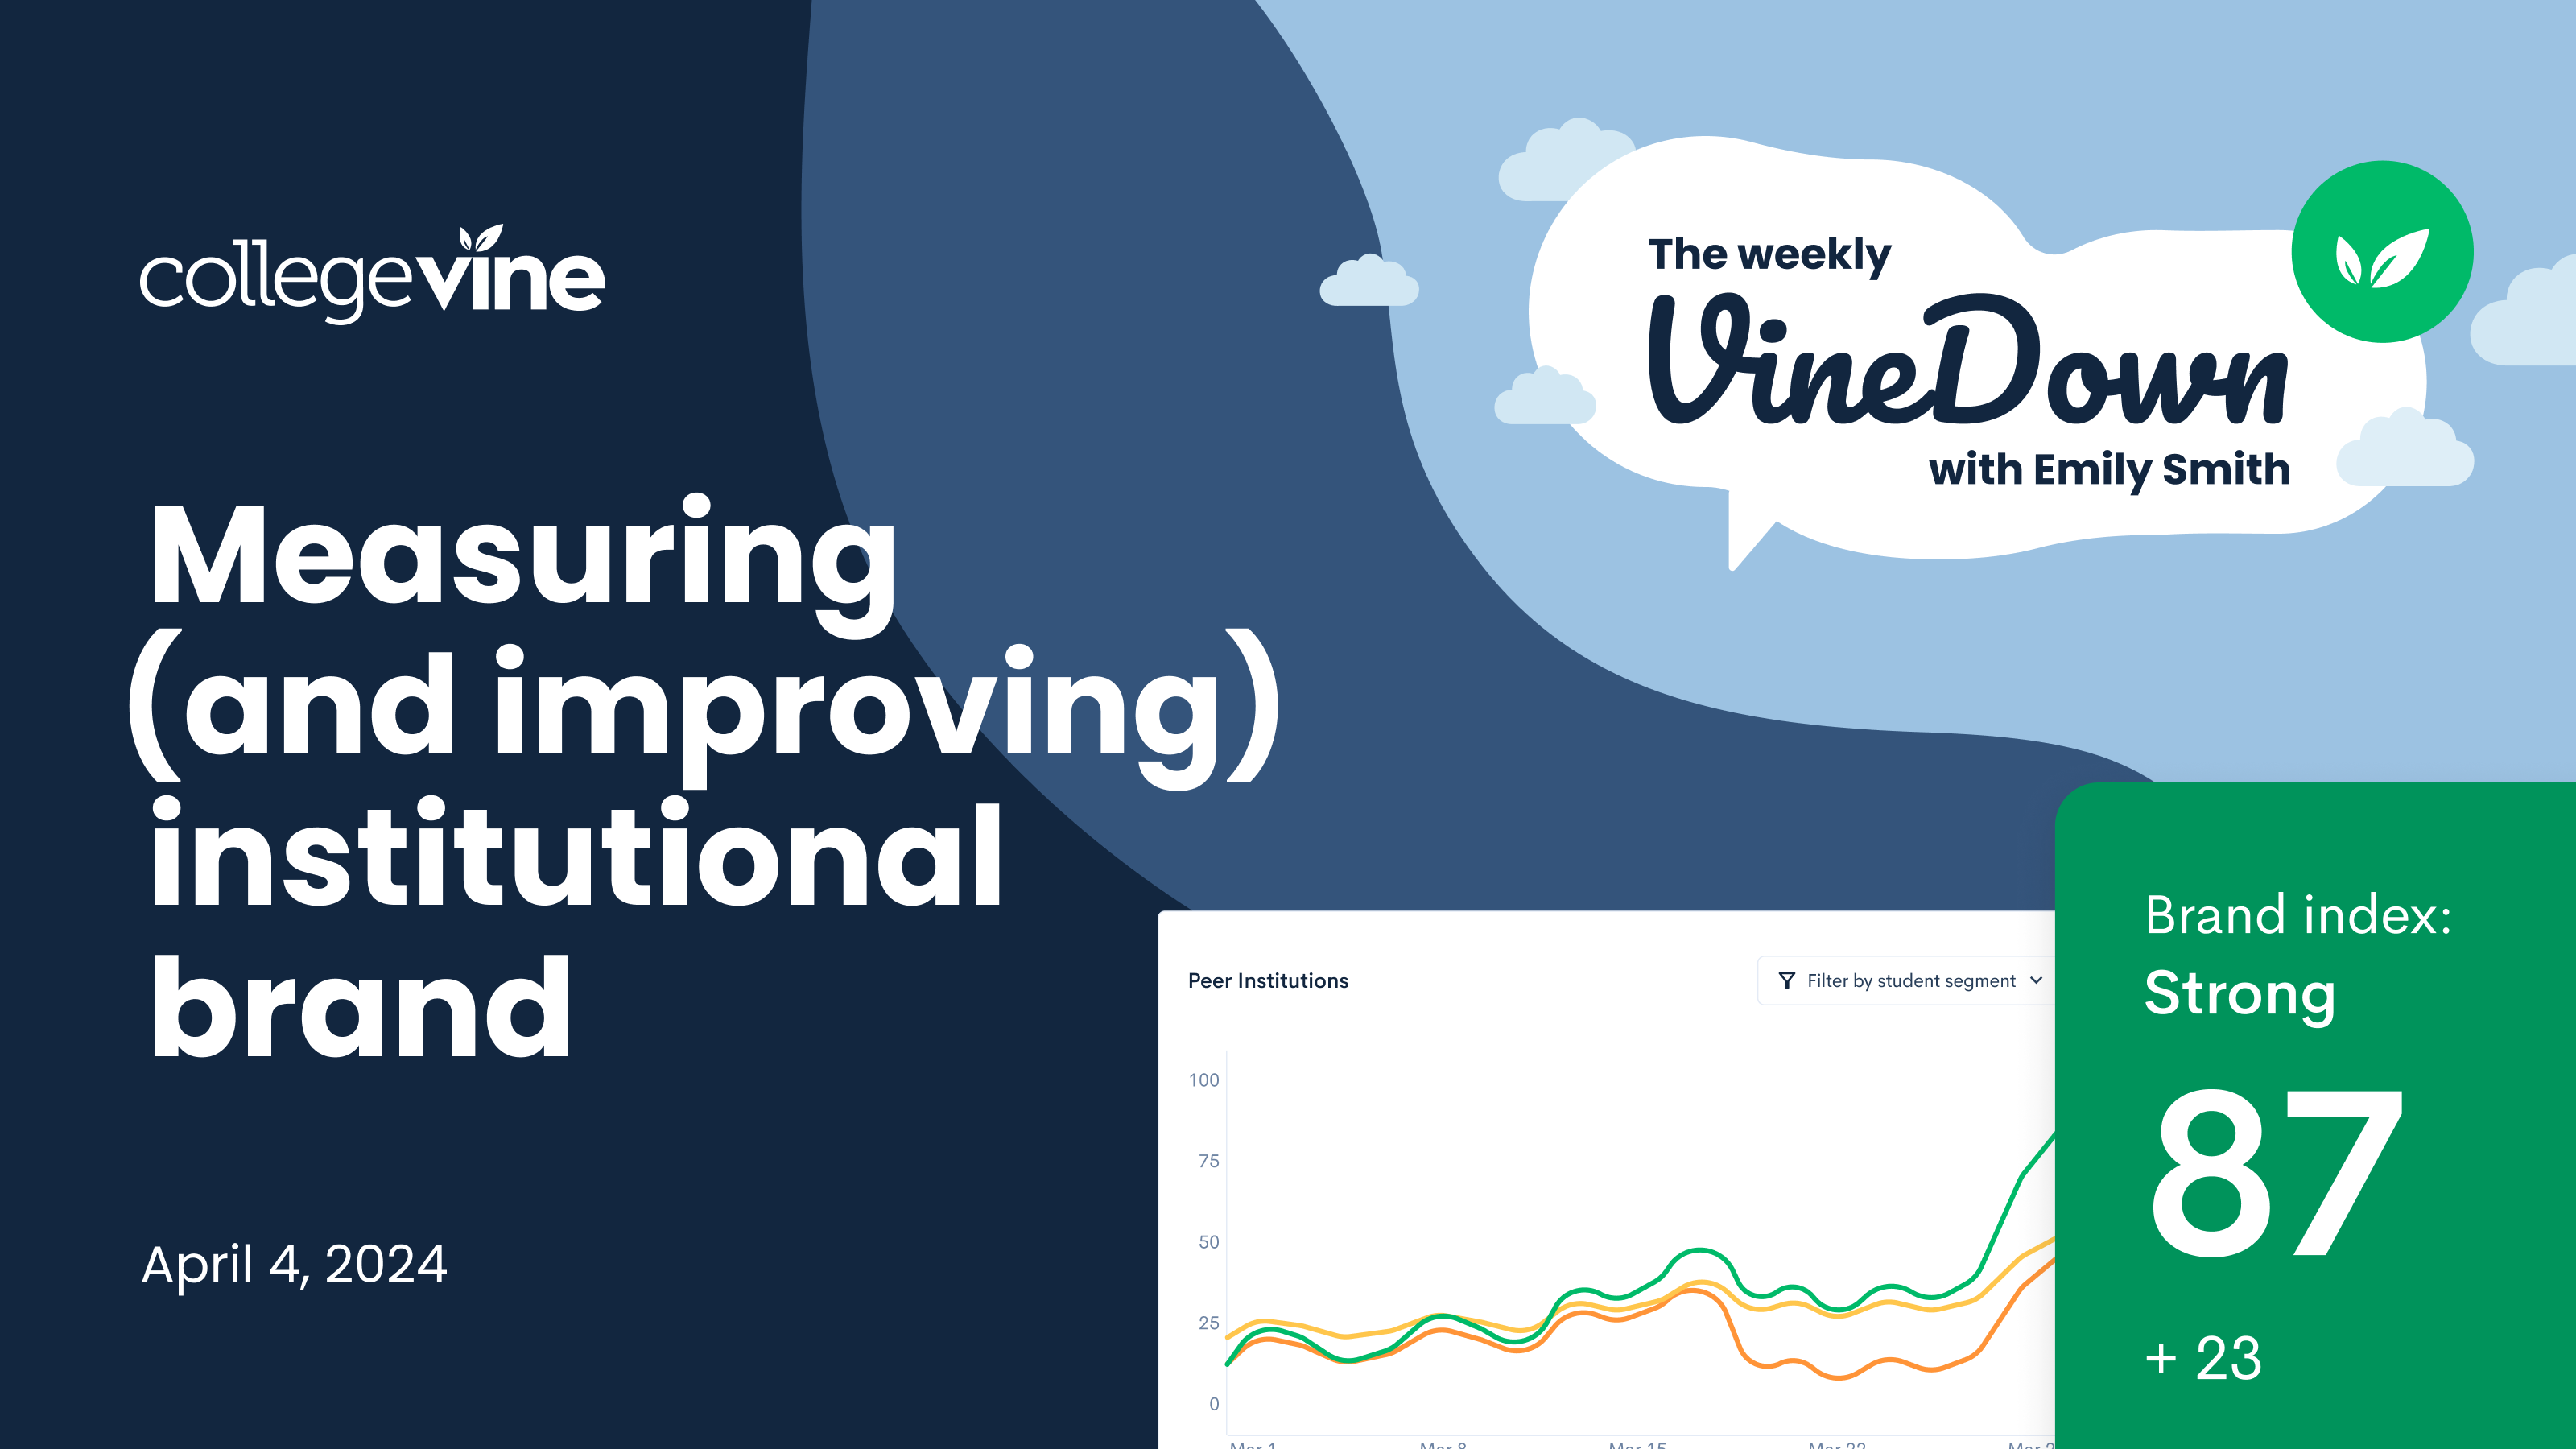 The Weekly VineDown: Measuring (and Improving) Institutional Brand